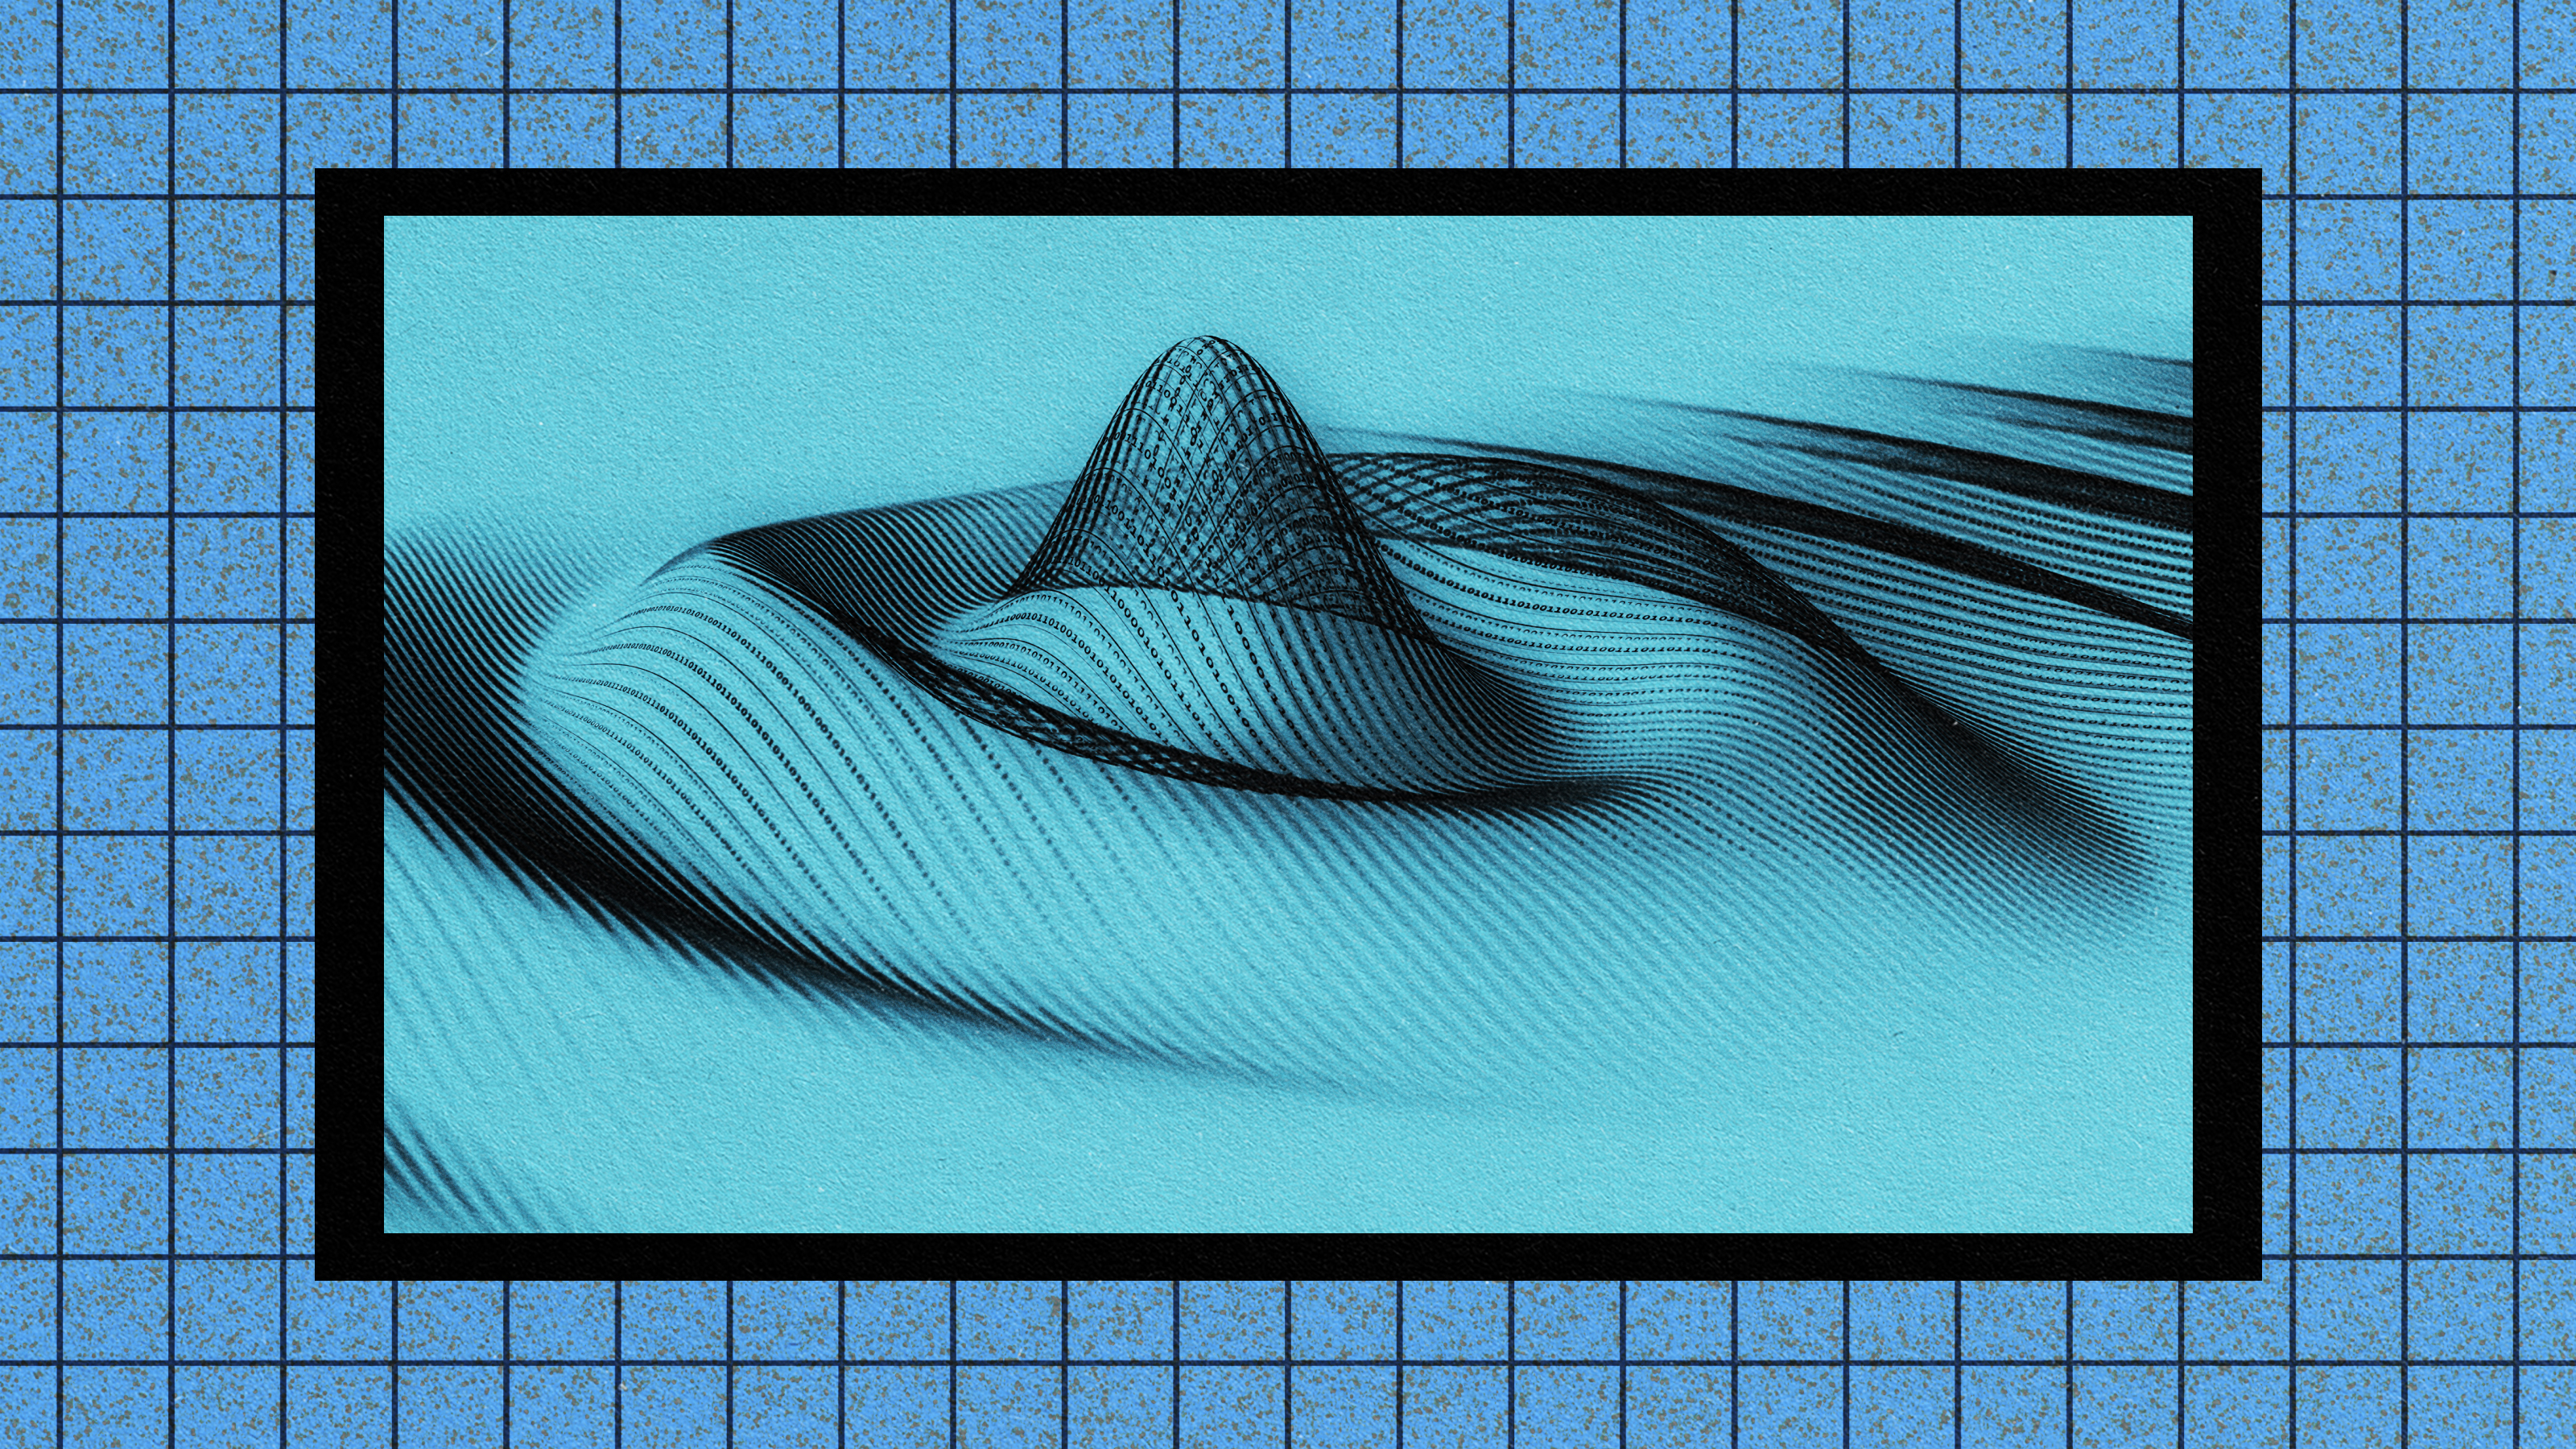 A black and white image of a quantum wave particle on a blue background.